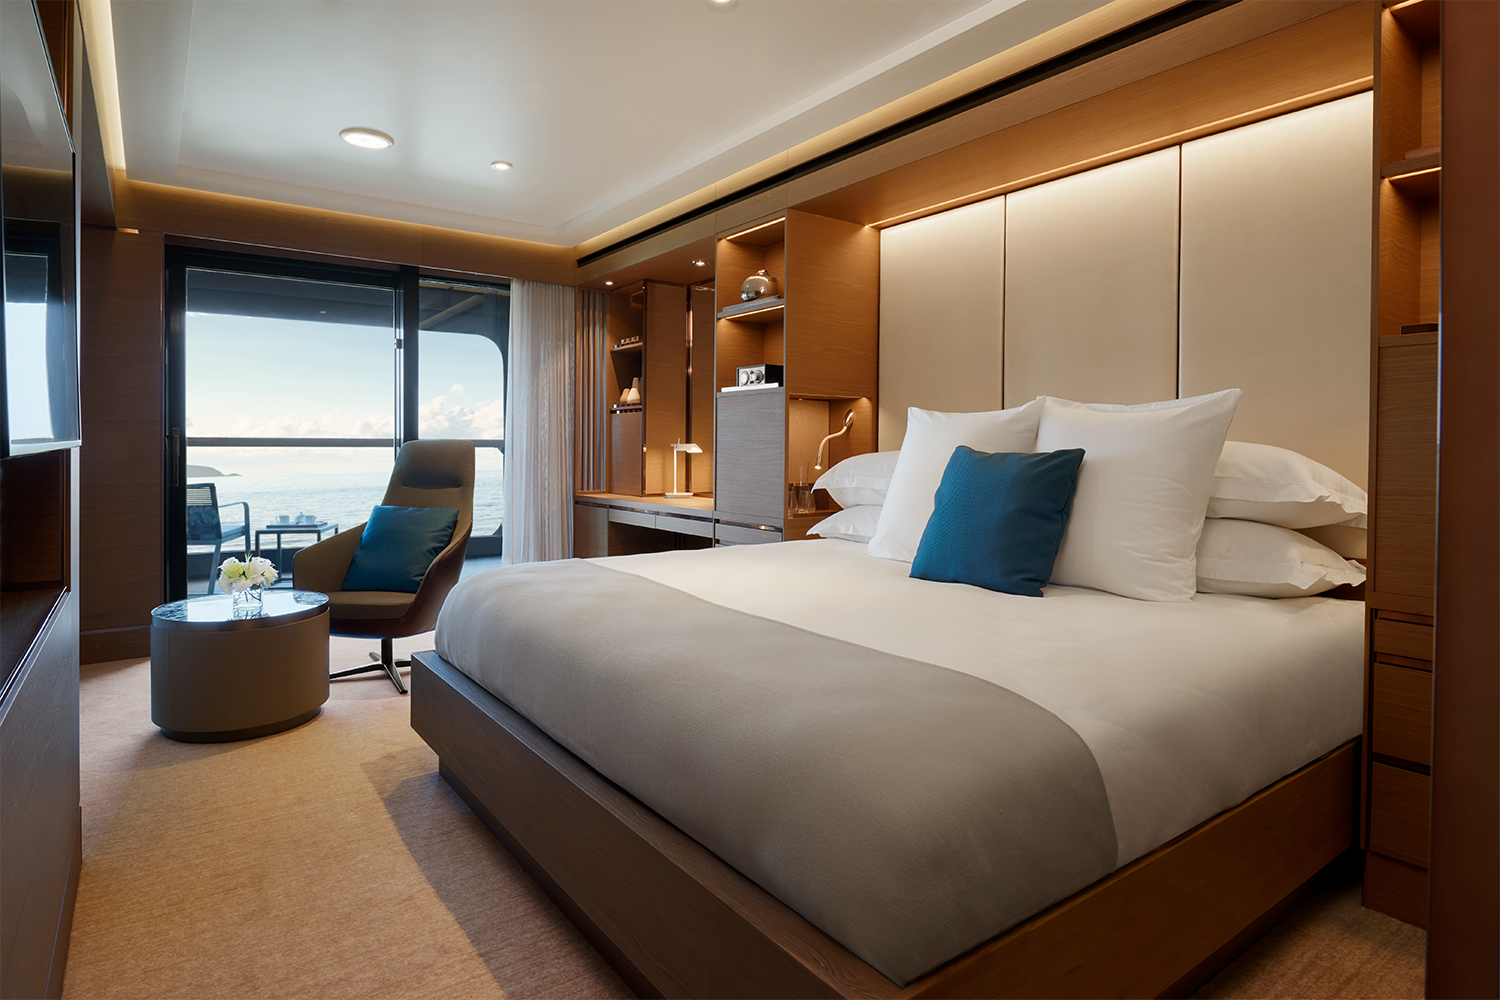 A bedroom in the new Evrima superyacht from The Ritz-Carlton Yacht Collection